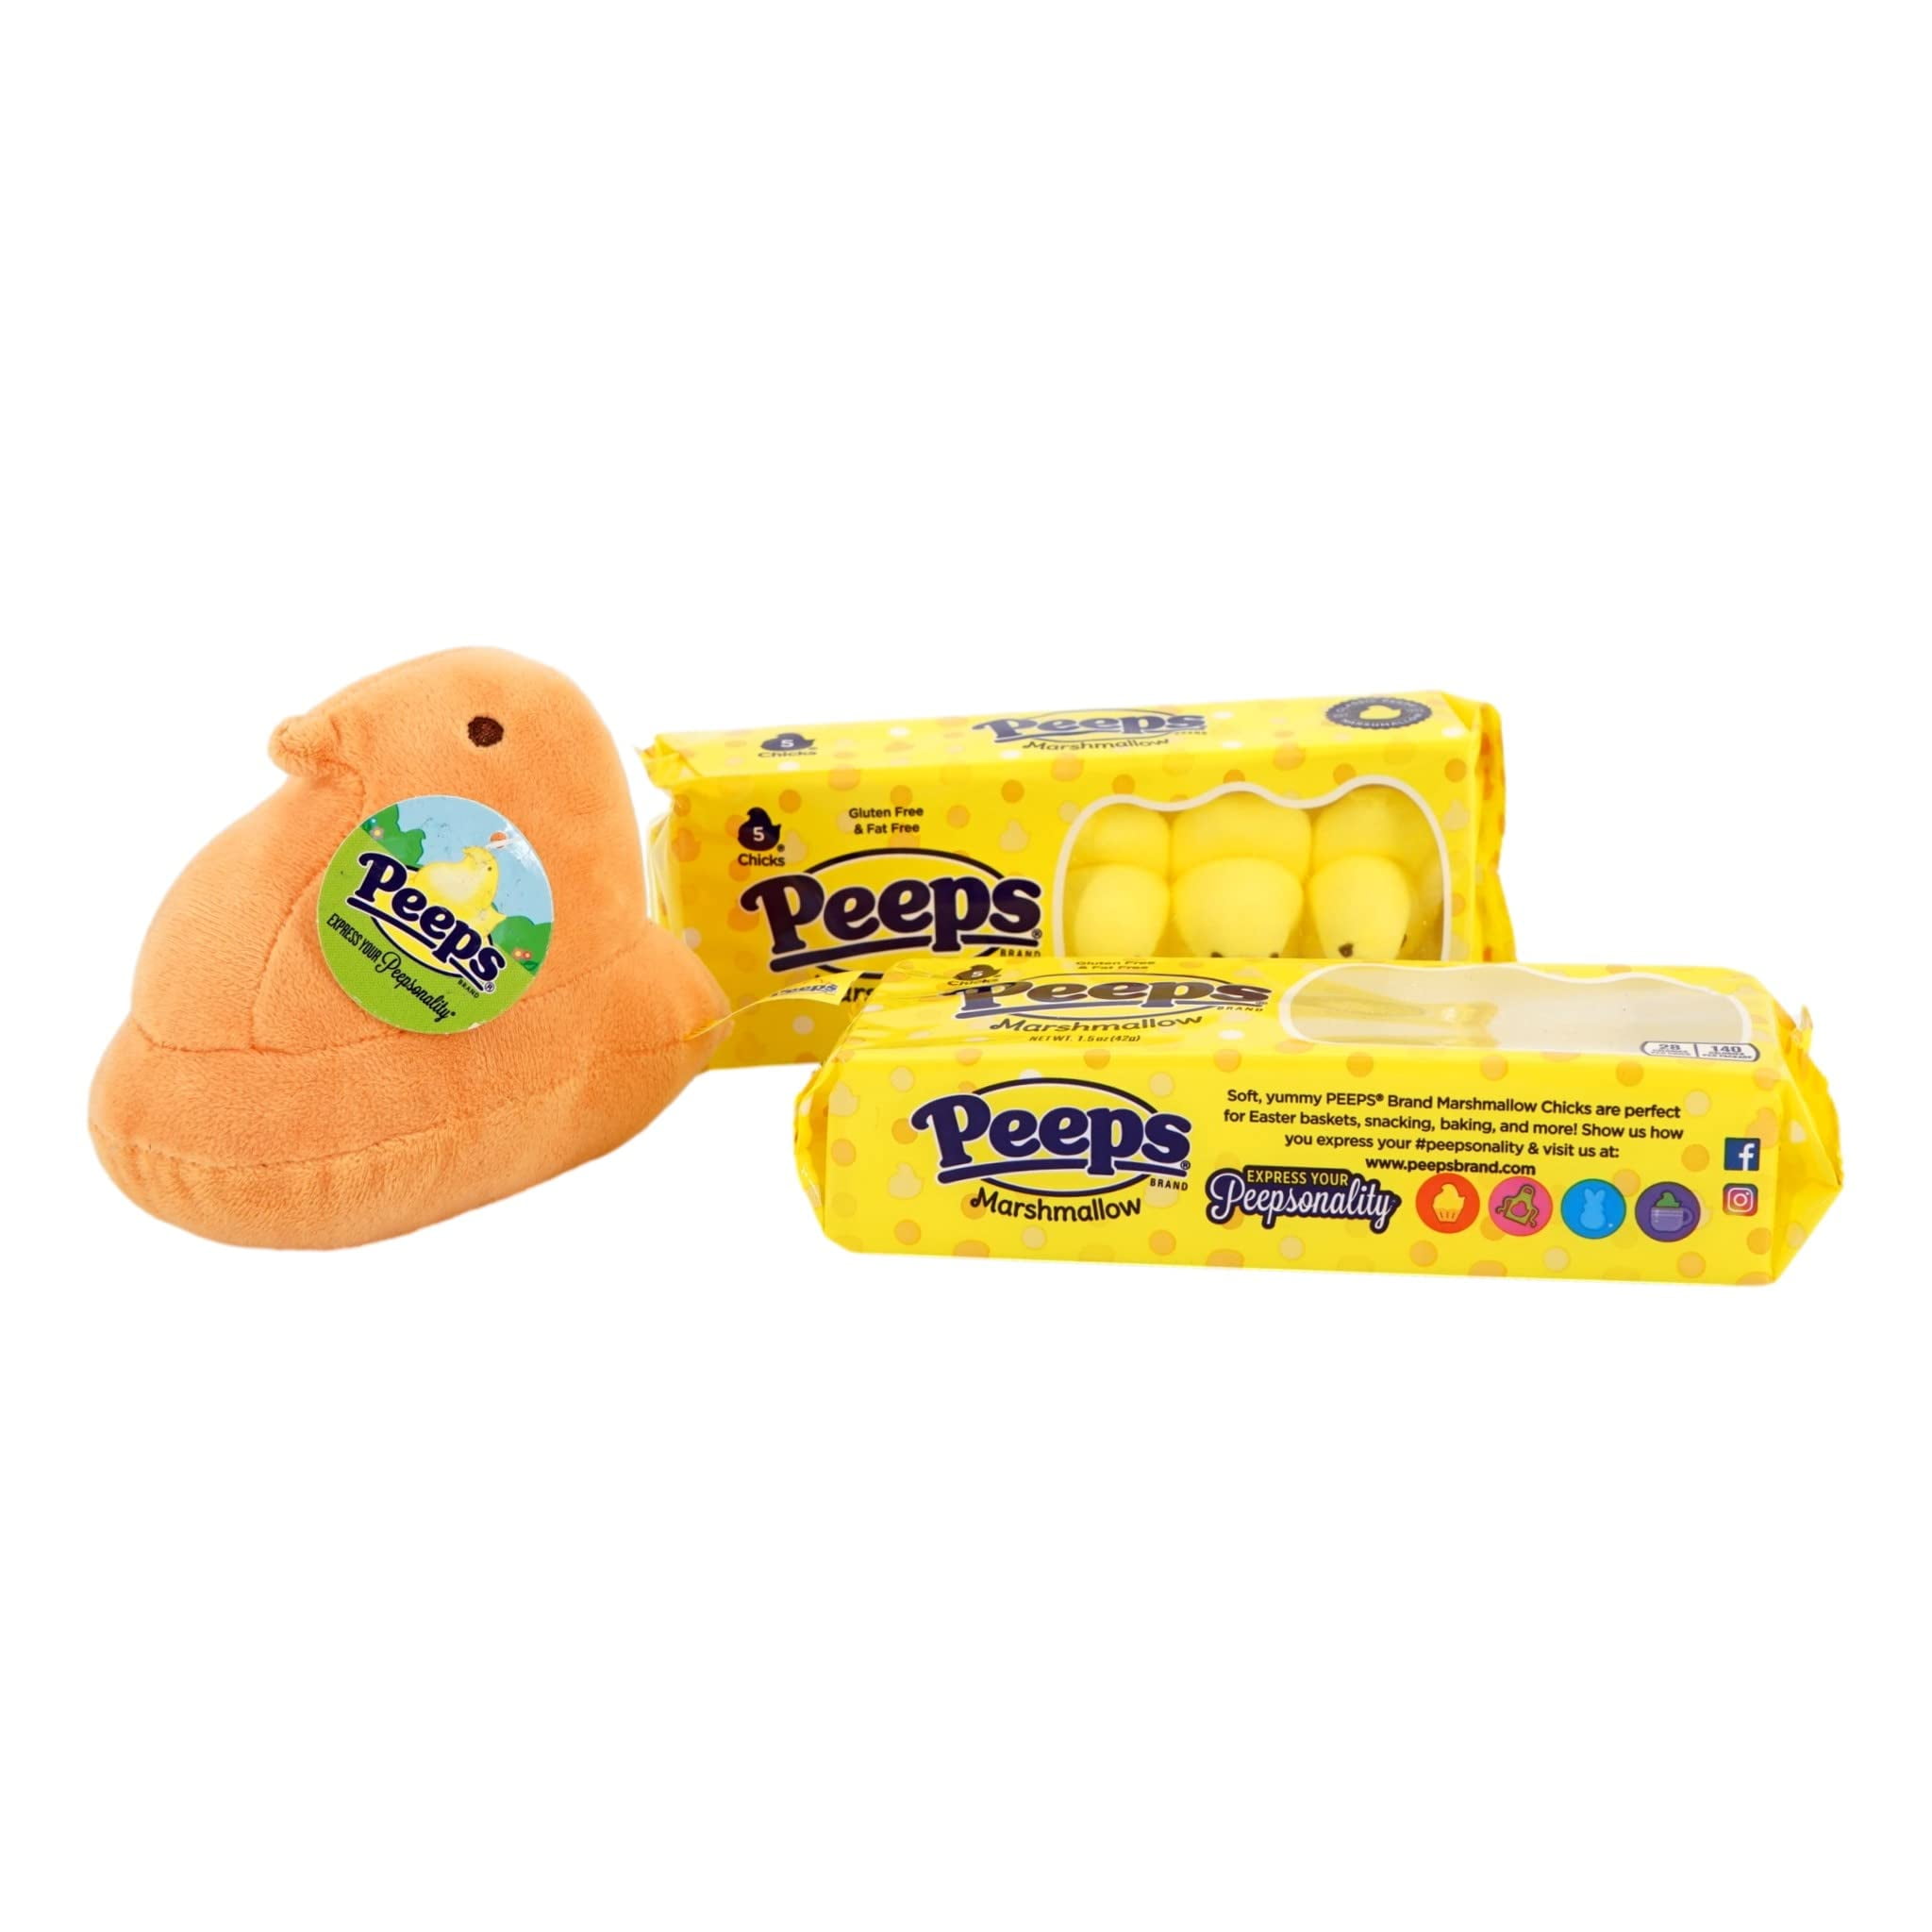 Details about   New Marshmallow PEEPS Plush Yellow Chick Easter Stuffed Animal Bean Bag Toy Tag 